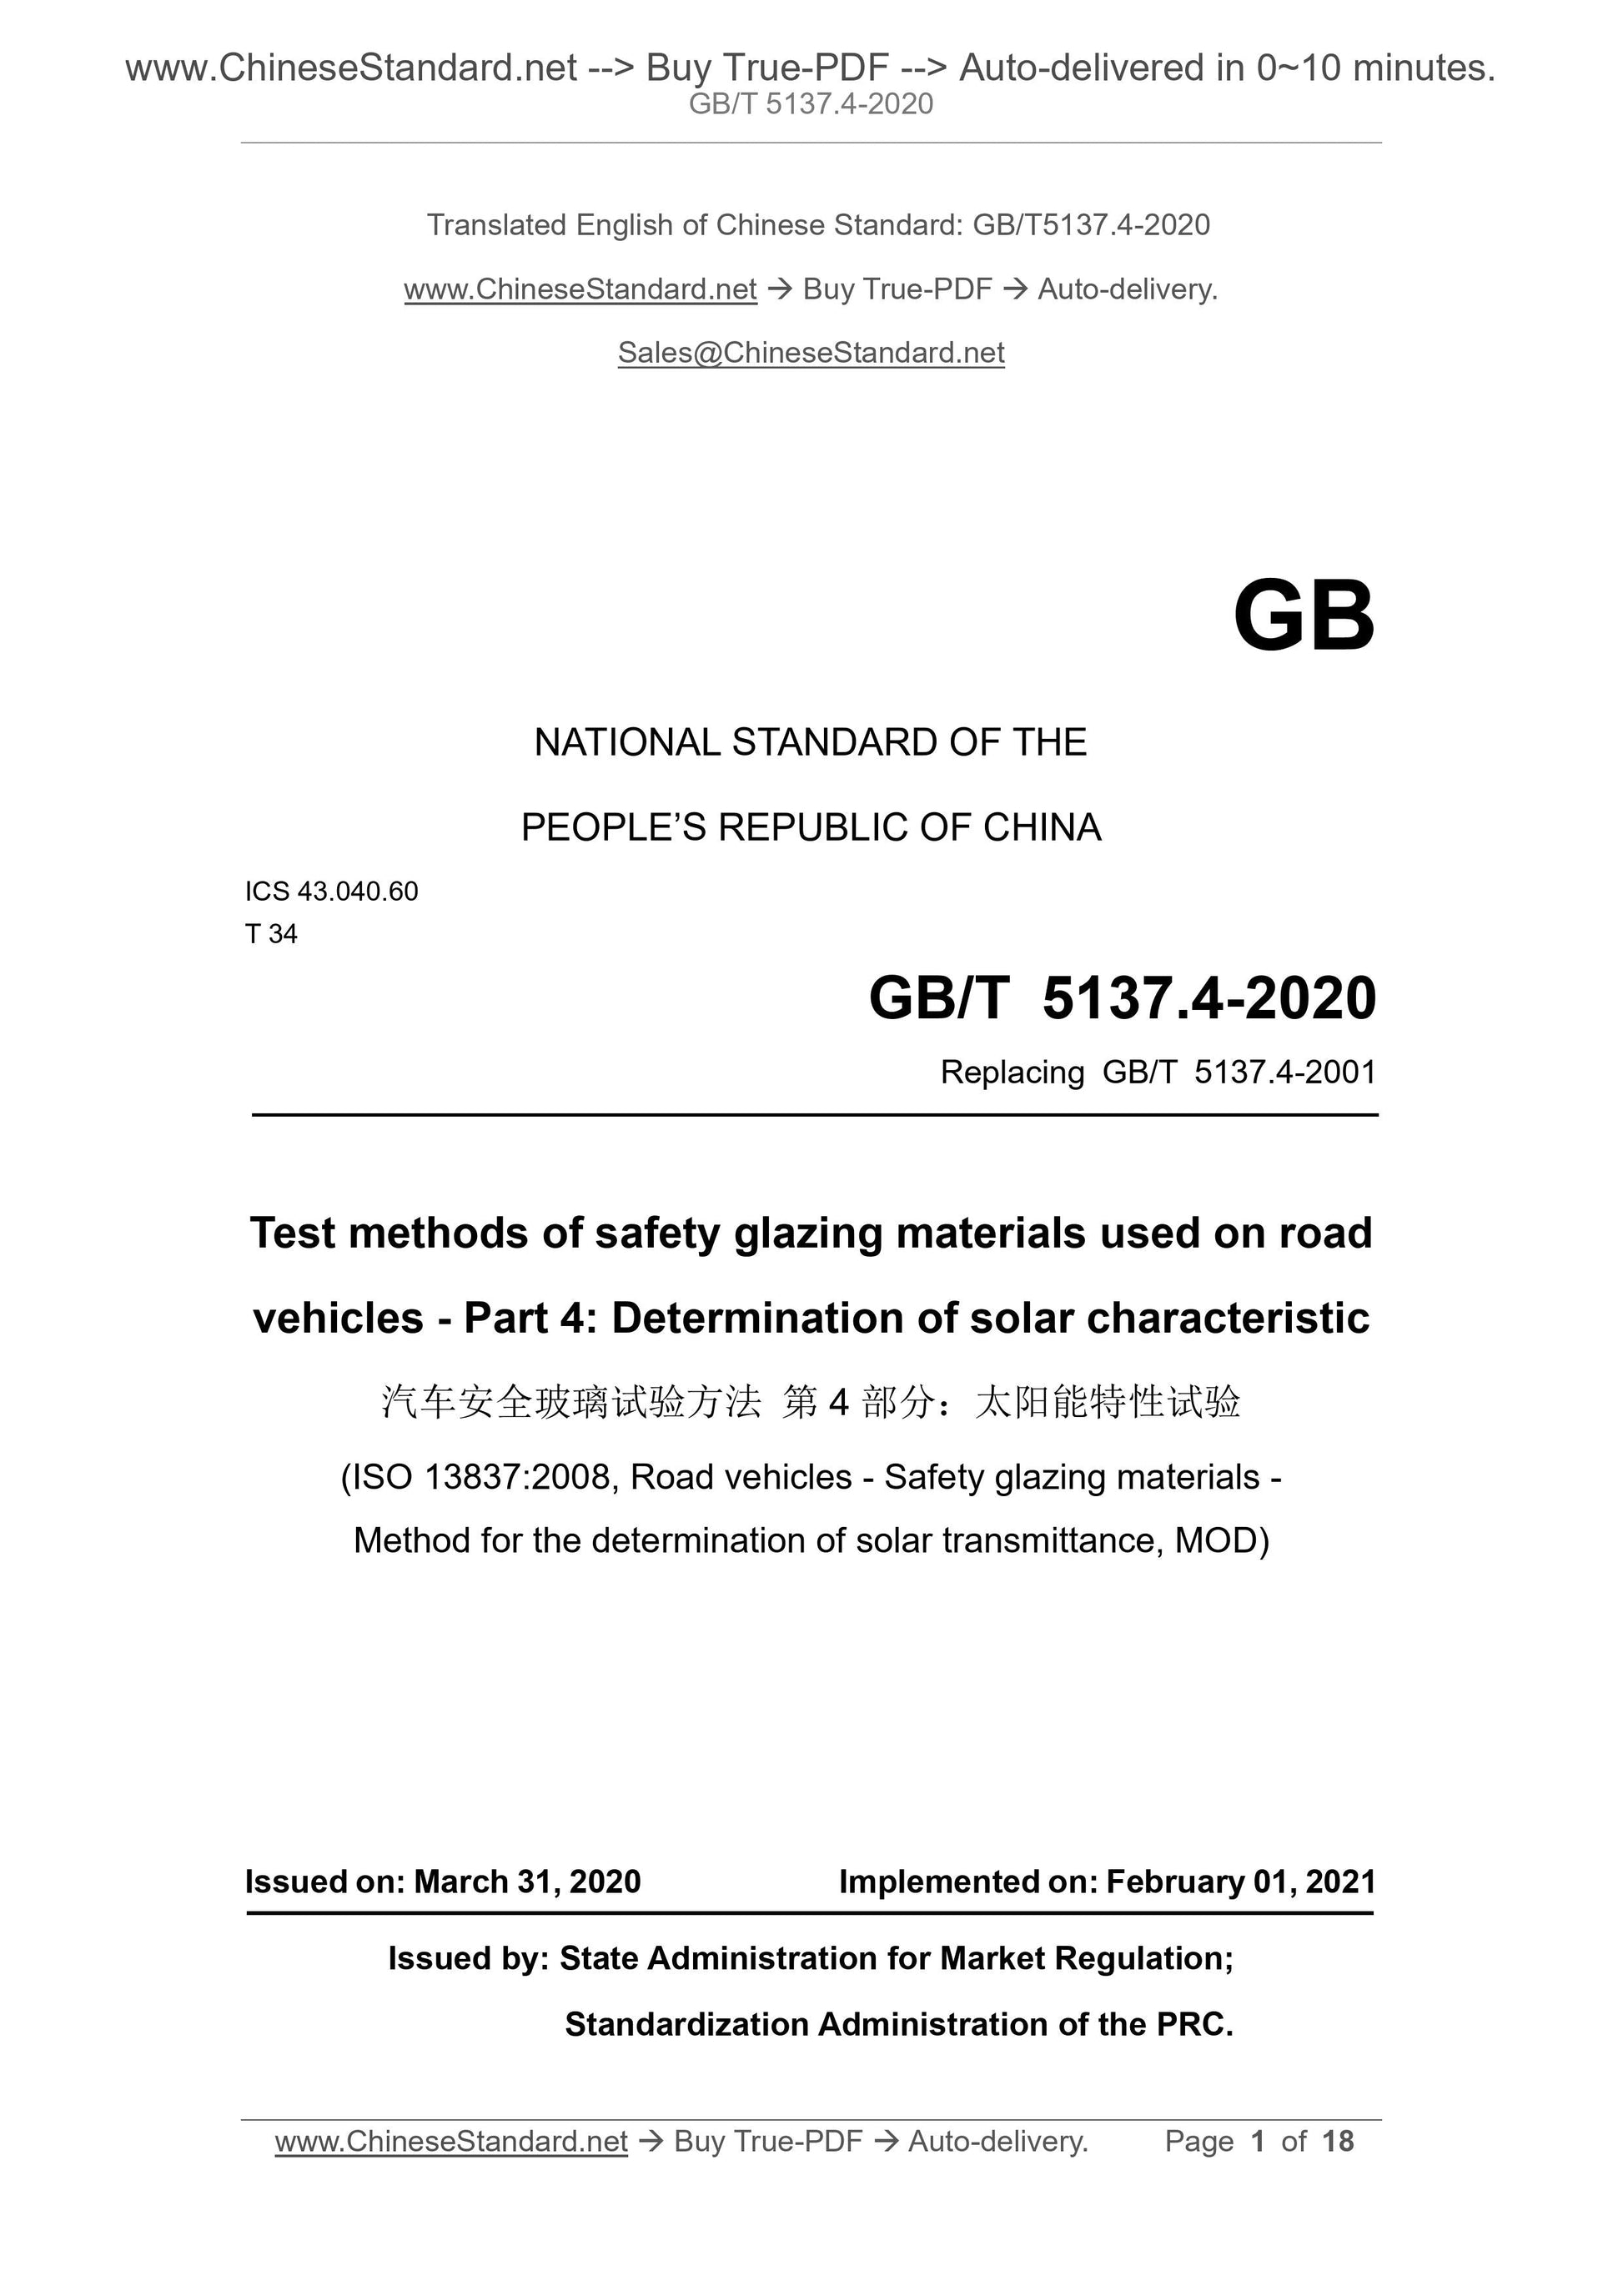 GB/T 5137.4-2020 Page 1